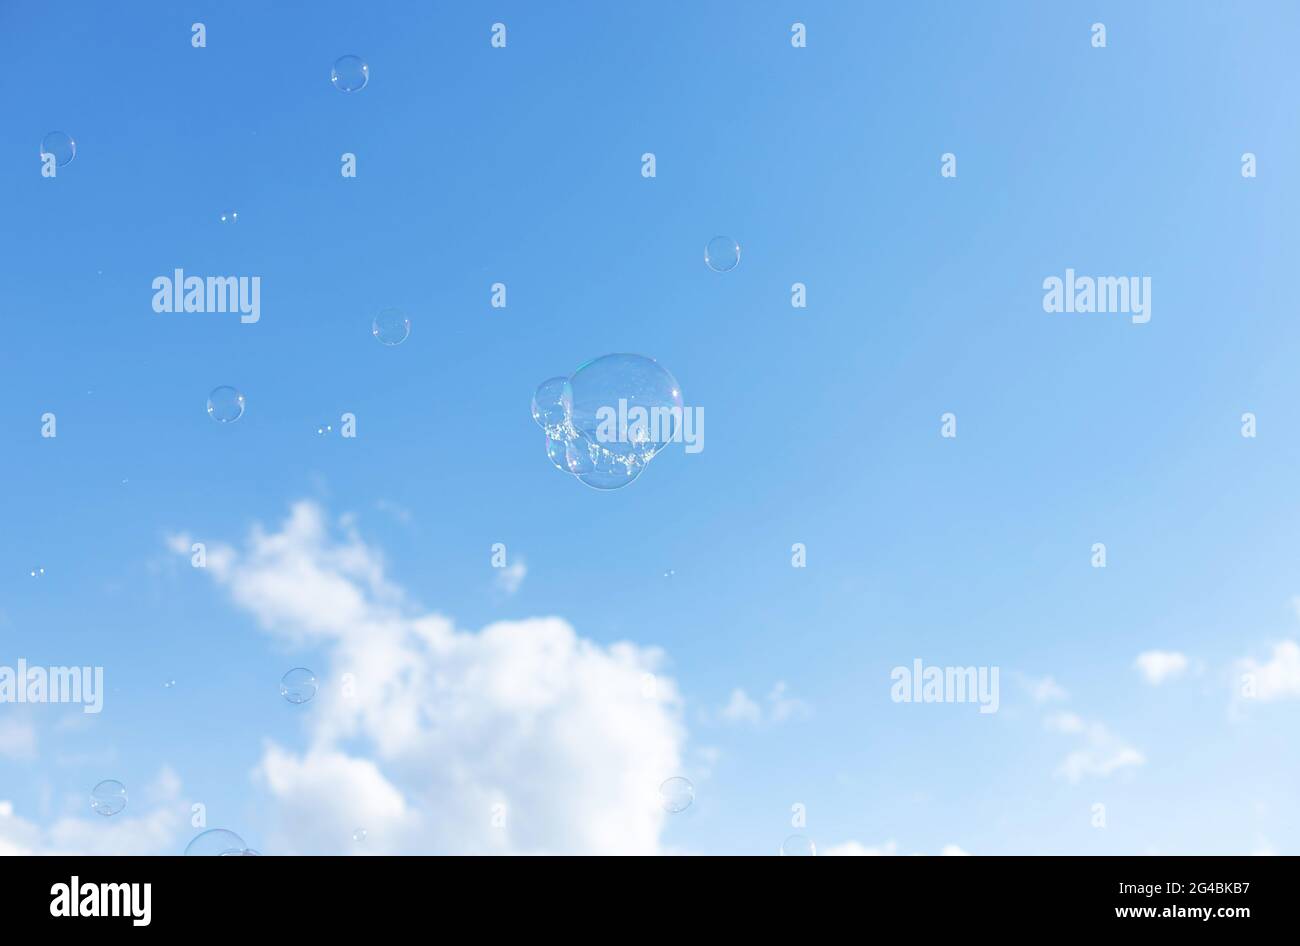 abstract background with shiny transparent soap bubbles Stock Photo